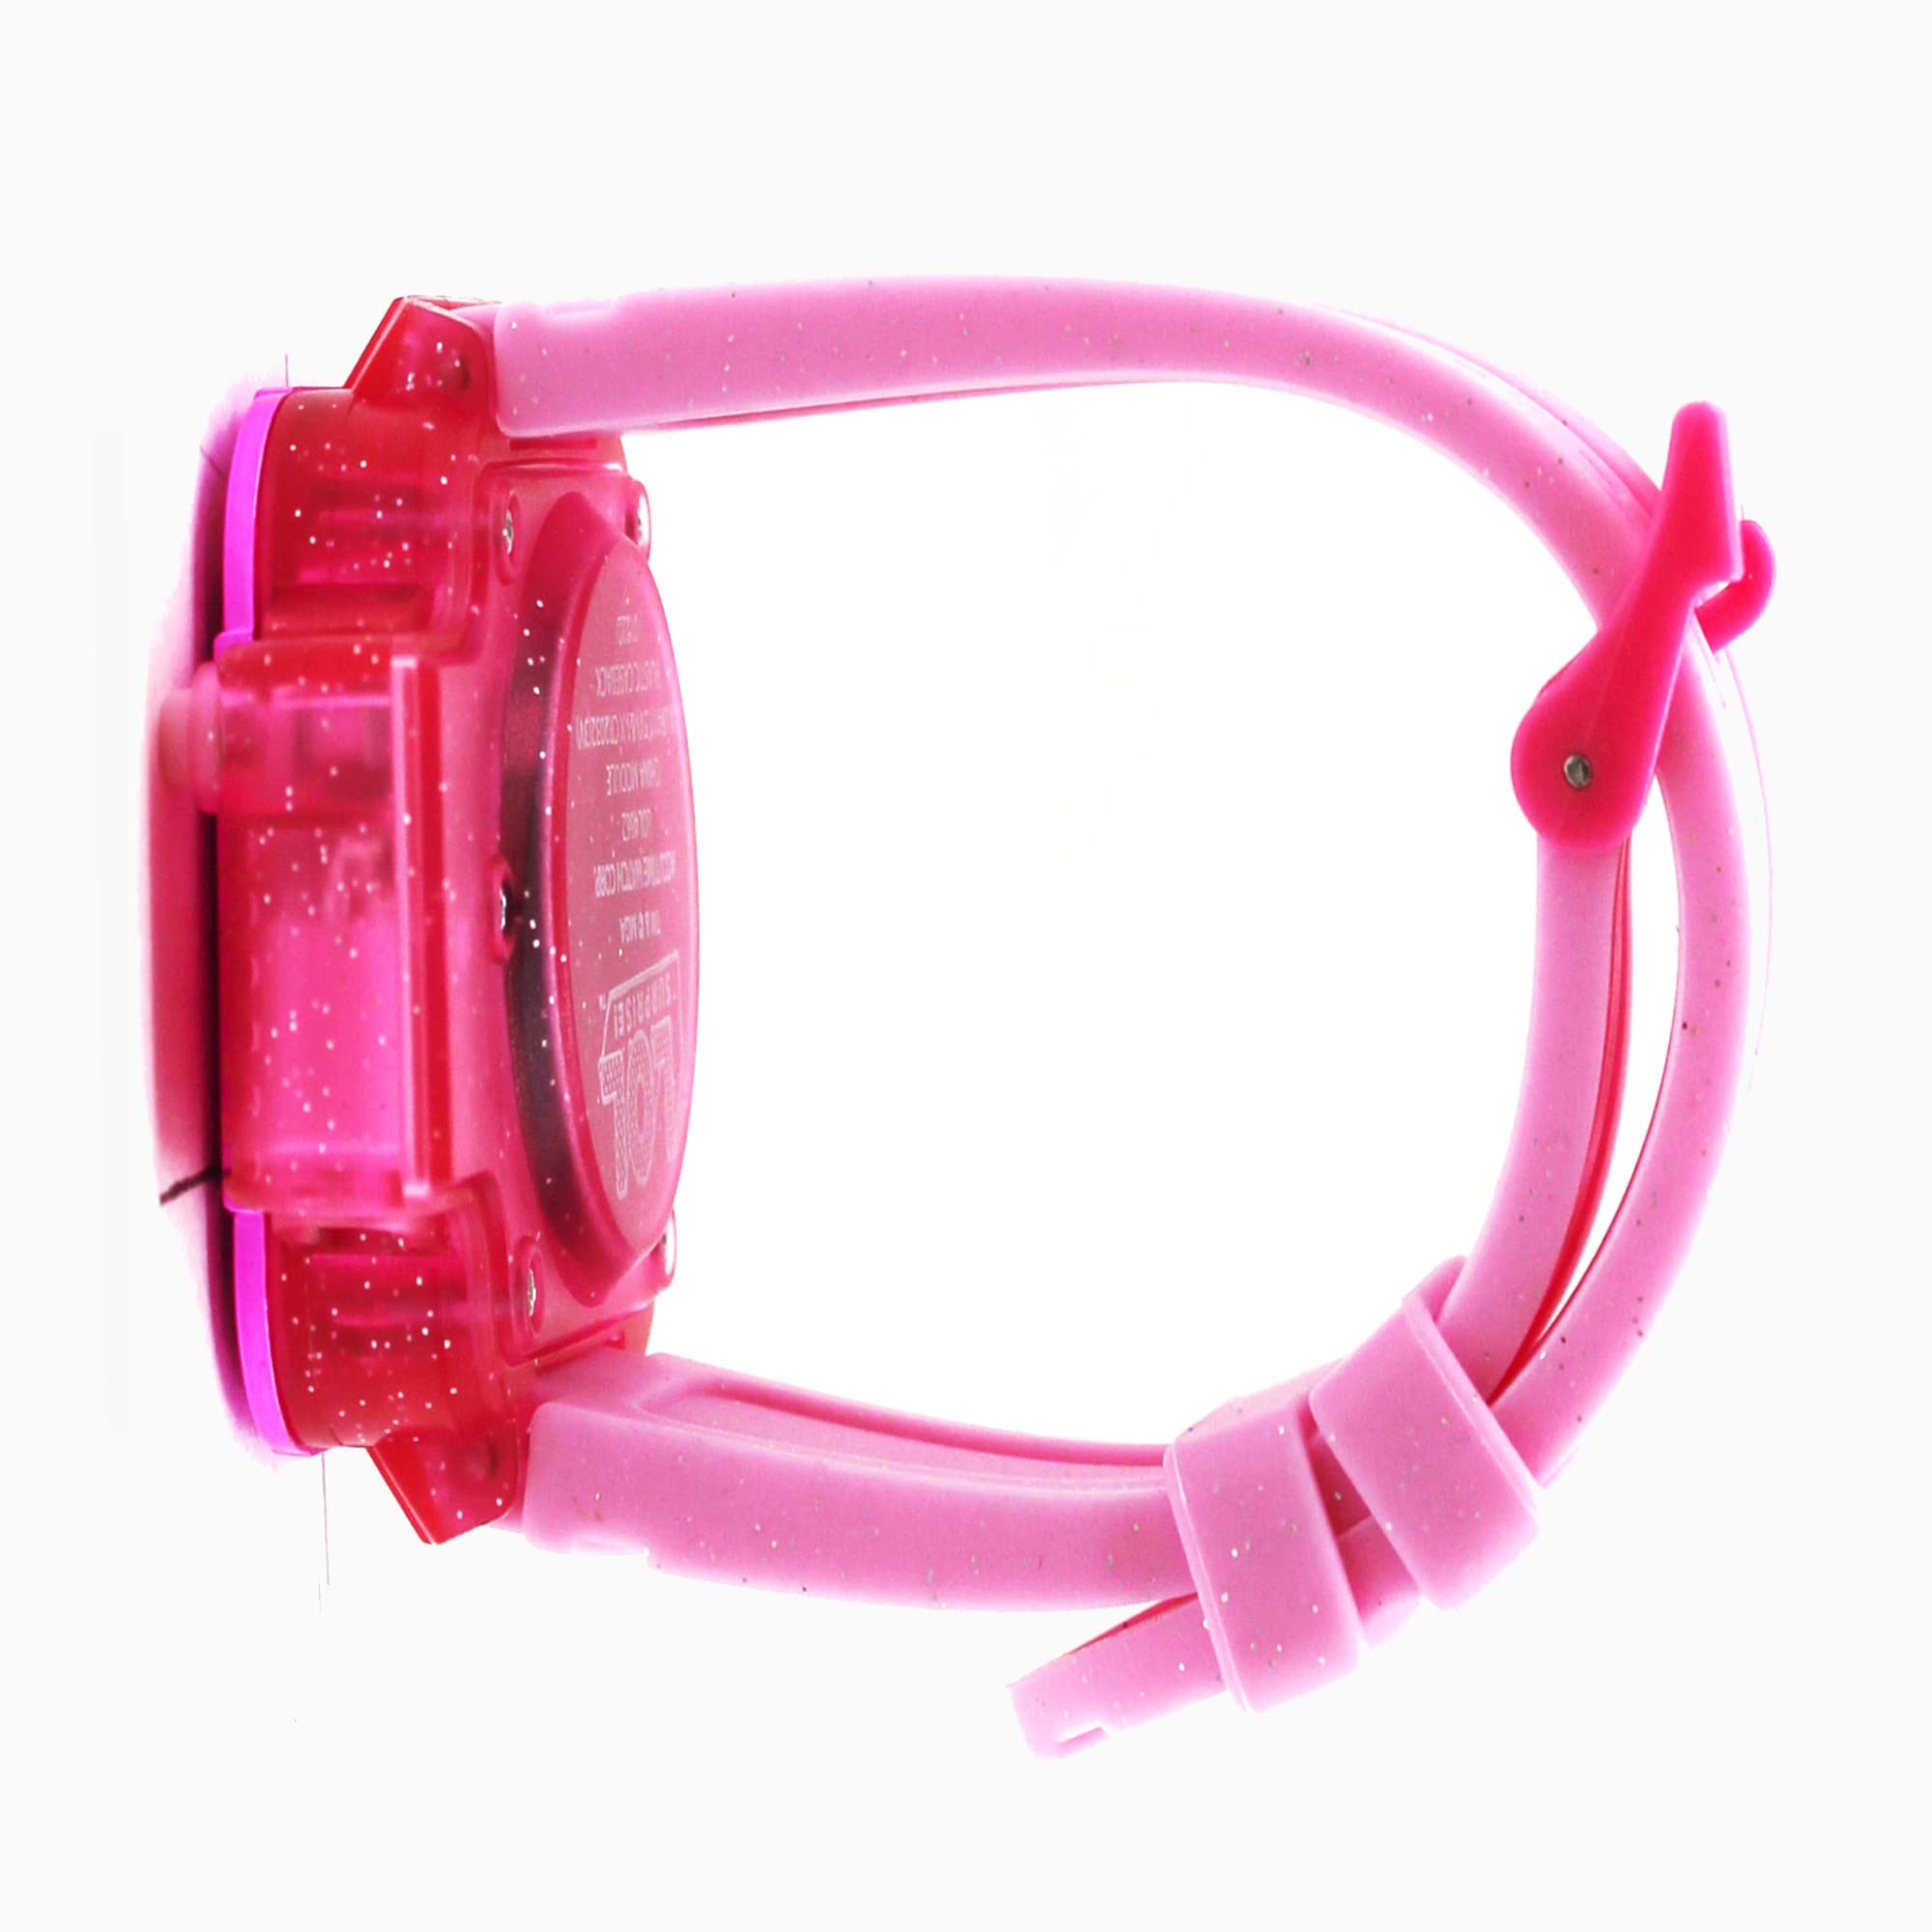 Accutime Kids MGA LOL Surprise Hot Pink Digital LCD Quartz Wrist Watch with Flashlight, Baby Pink Strap for Girls, Boys, Kids All Ages (Model: LOL4662AZ)